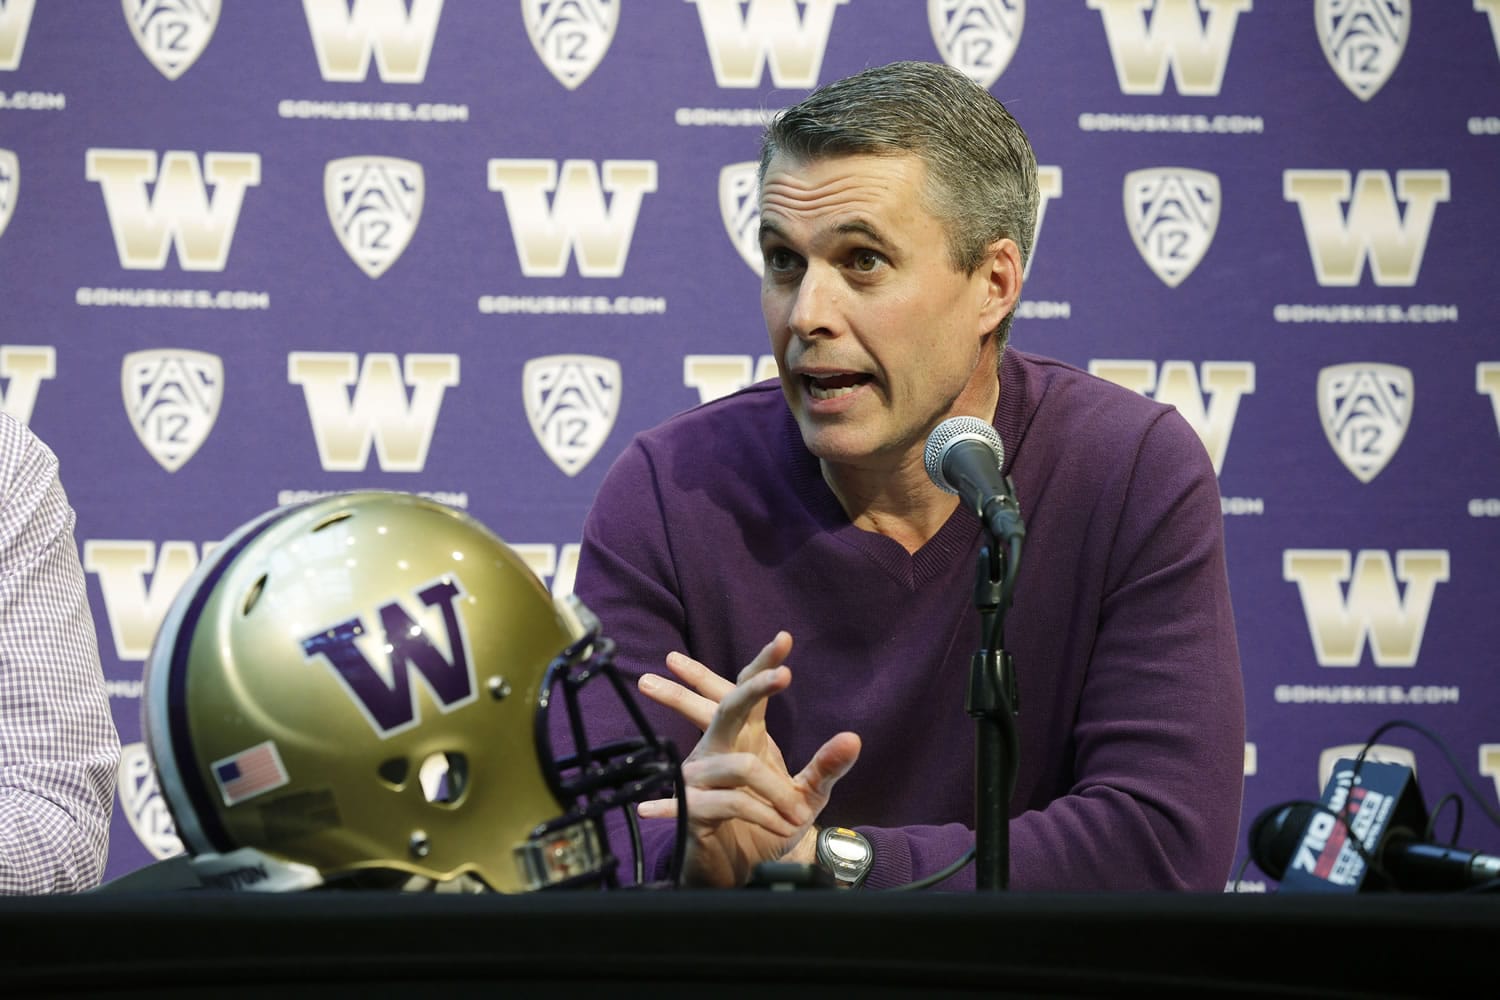 Washington head football coach Chris Petersen talks to reporters Monday, March 3, 2014, in Seattle. Washington begins spring NCAA college football practice on Tuesday, March 4, 2014. (AP Photo/Ted S.